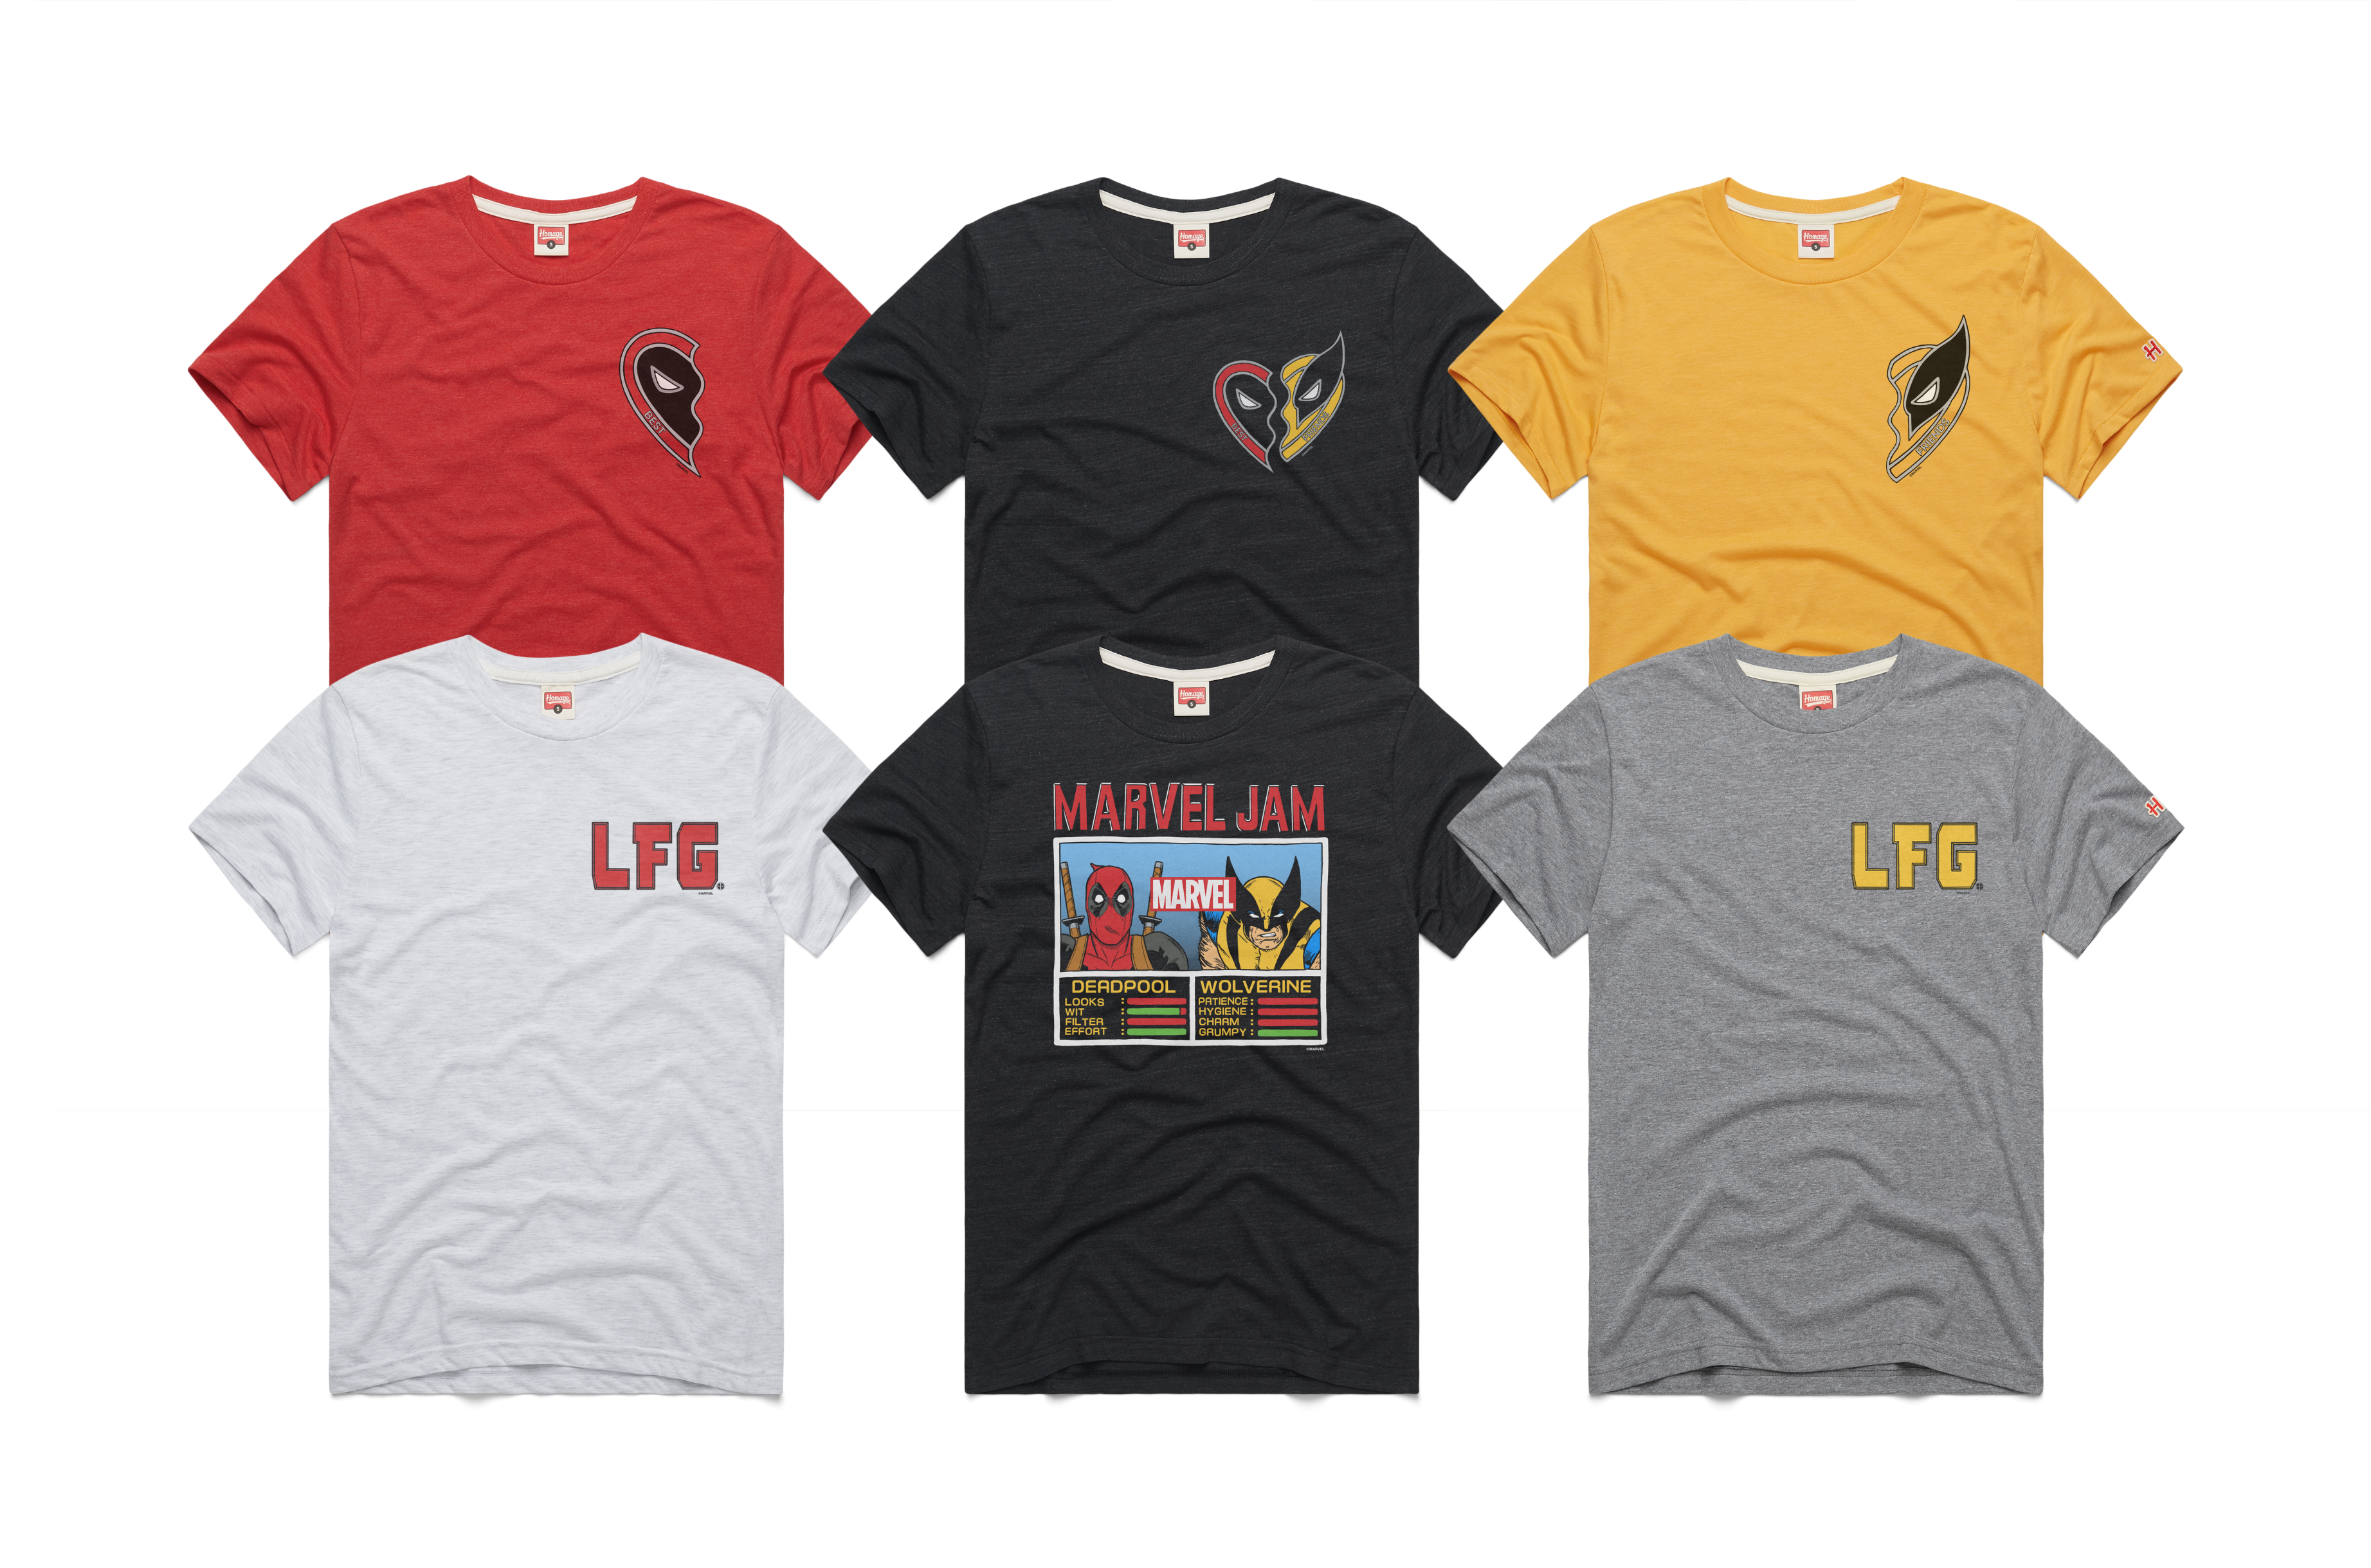 Homage collaborates with Ryan Reynolds for new 'Deadpool & Wolverine' shirts